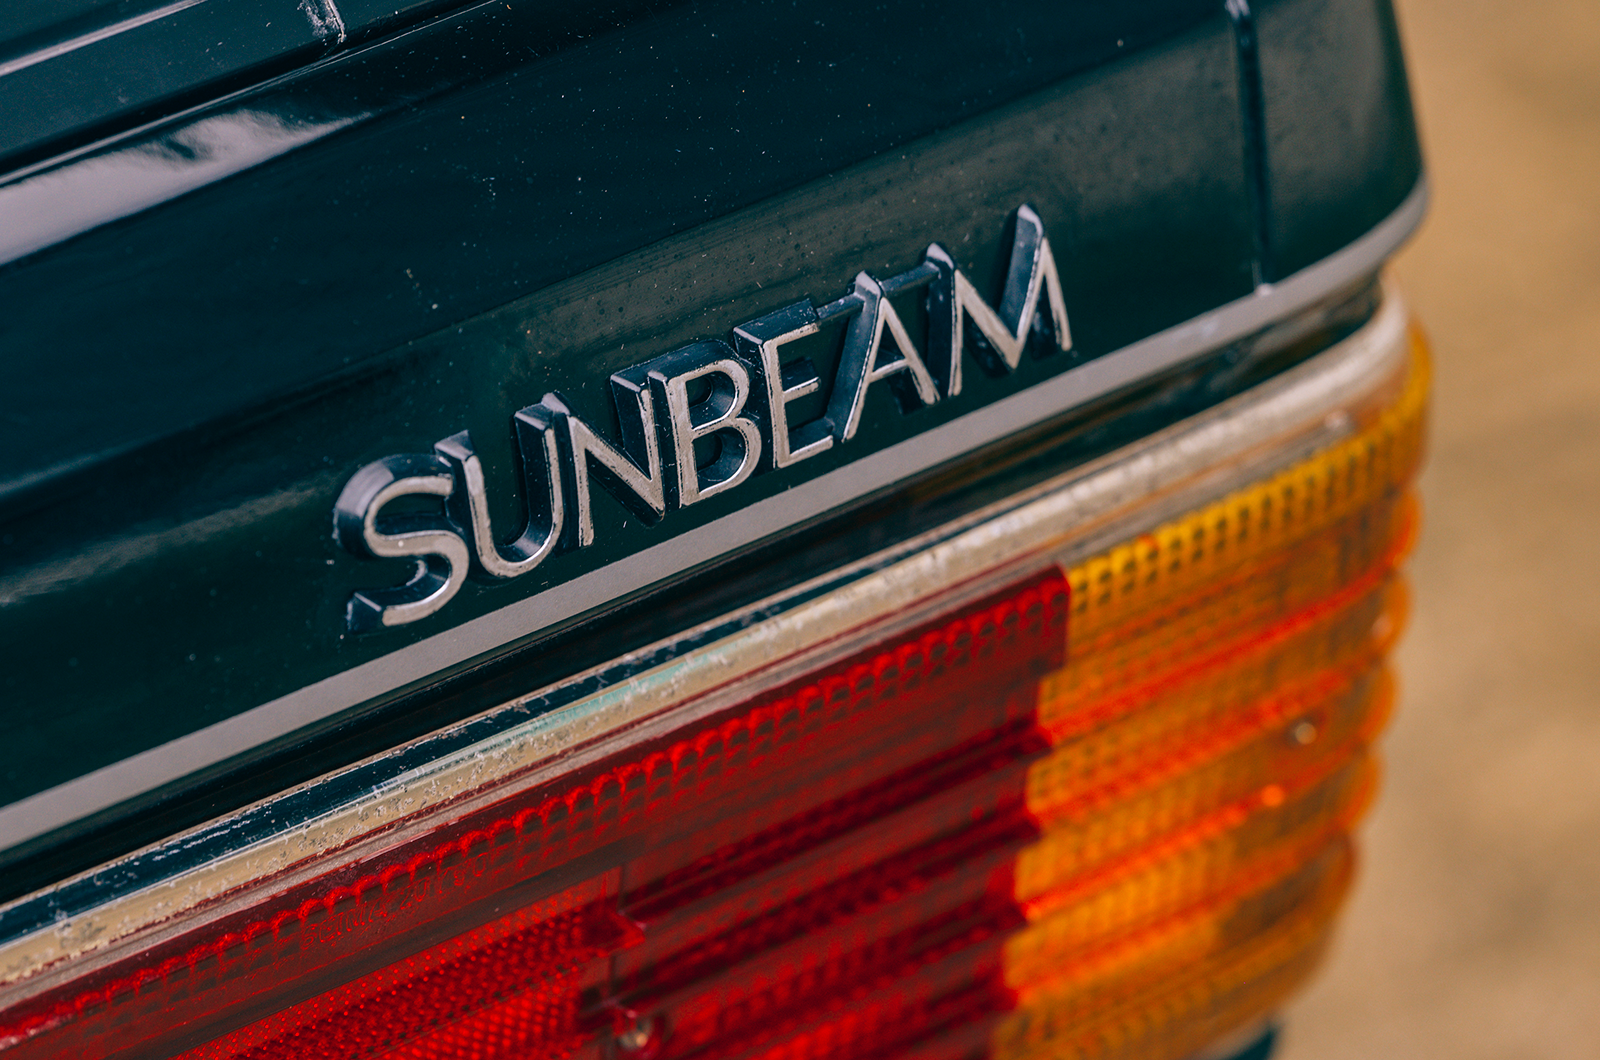 Classic & Sports Car – Changing of the guard: Talbot Sunbeam Lotus and Audi quattro